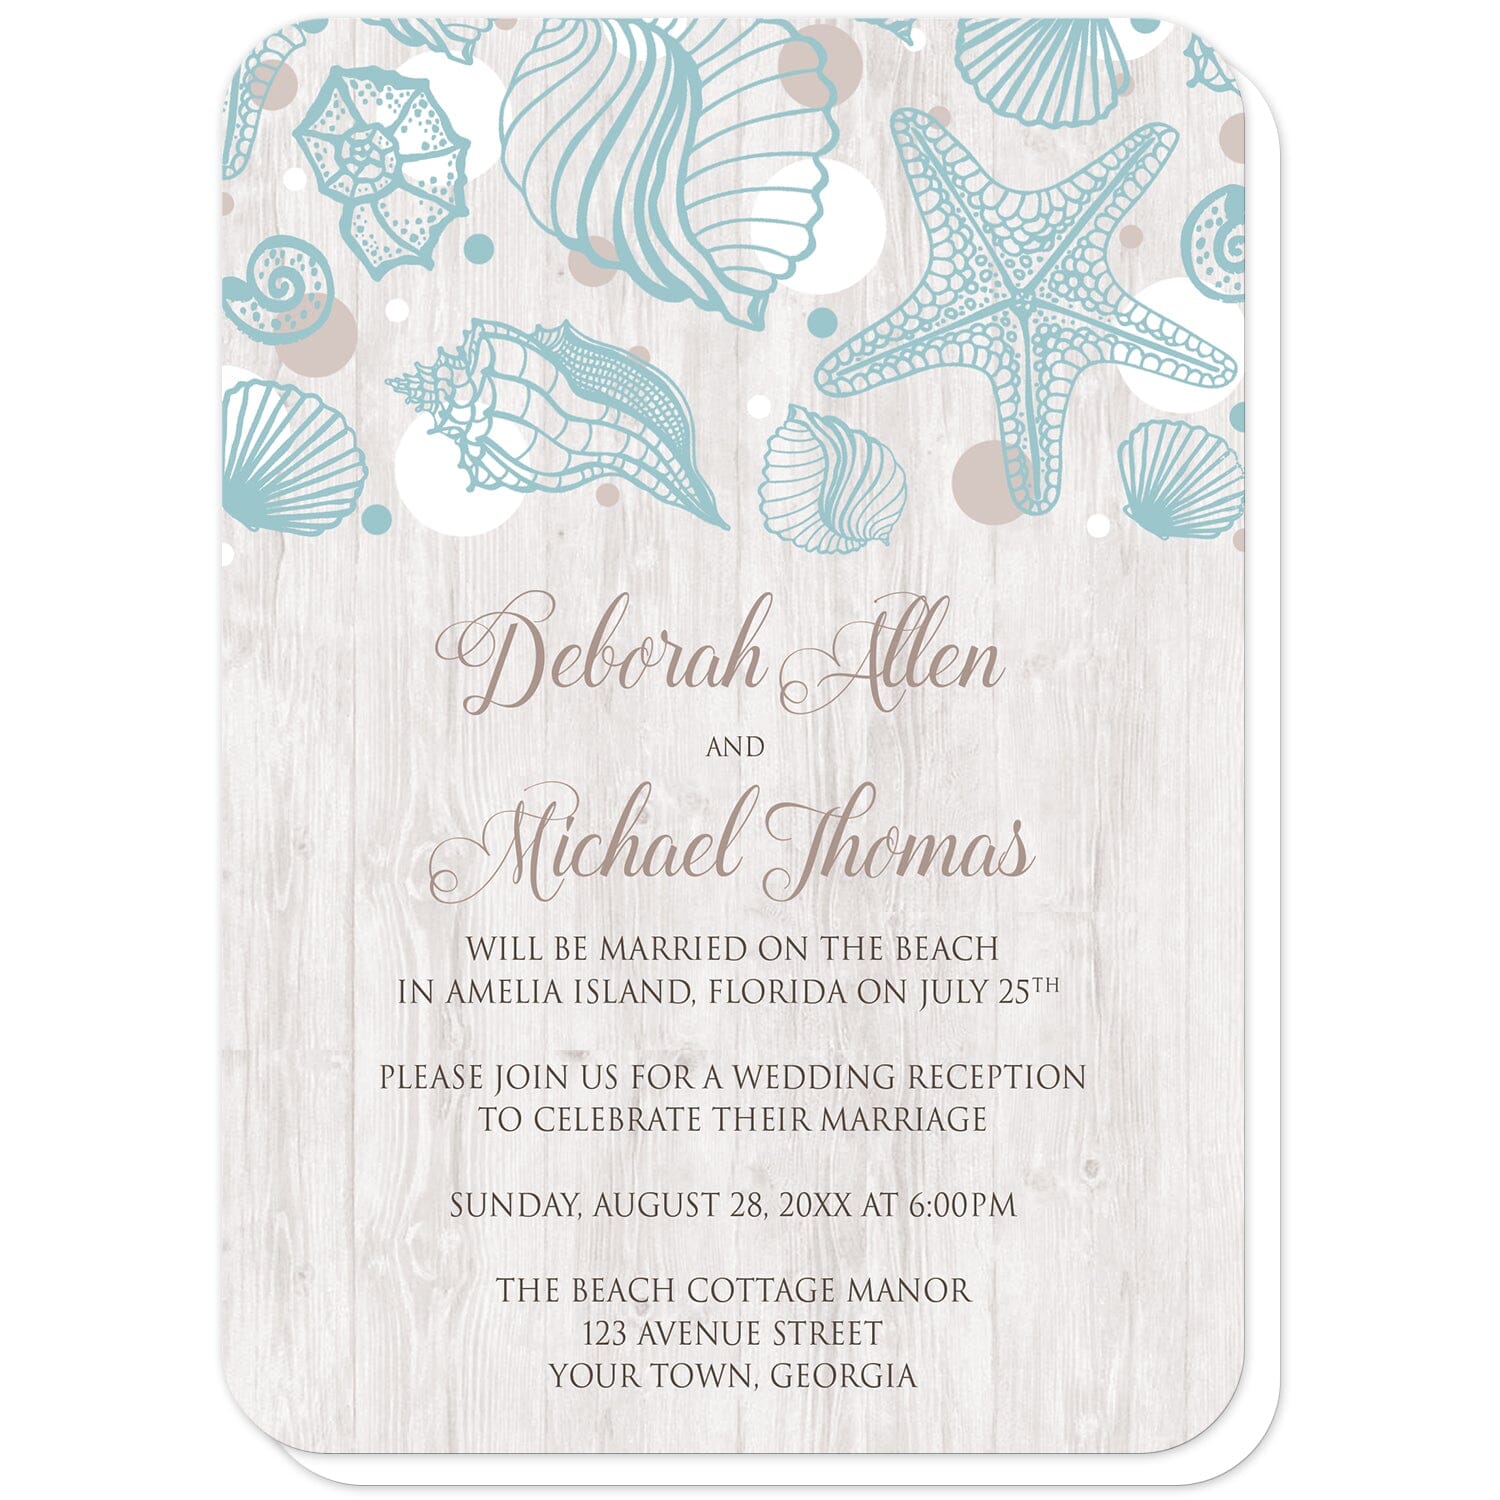 Seashell Whitewashed Wood Beach Reception Only Invitations (with rounded corners) at Artistically Invited. Rustic-chic seashell whitewashed wood beach reception only invitations with a turquoise seashell line drawing with accent tan and white dots over a light whitewashed wood illustration. Your personalized post-wedding reception details are custom printed in tan and brown over the whitewashed wood background below the seashells.